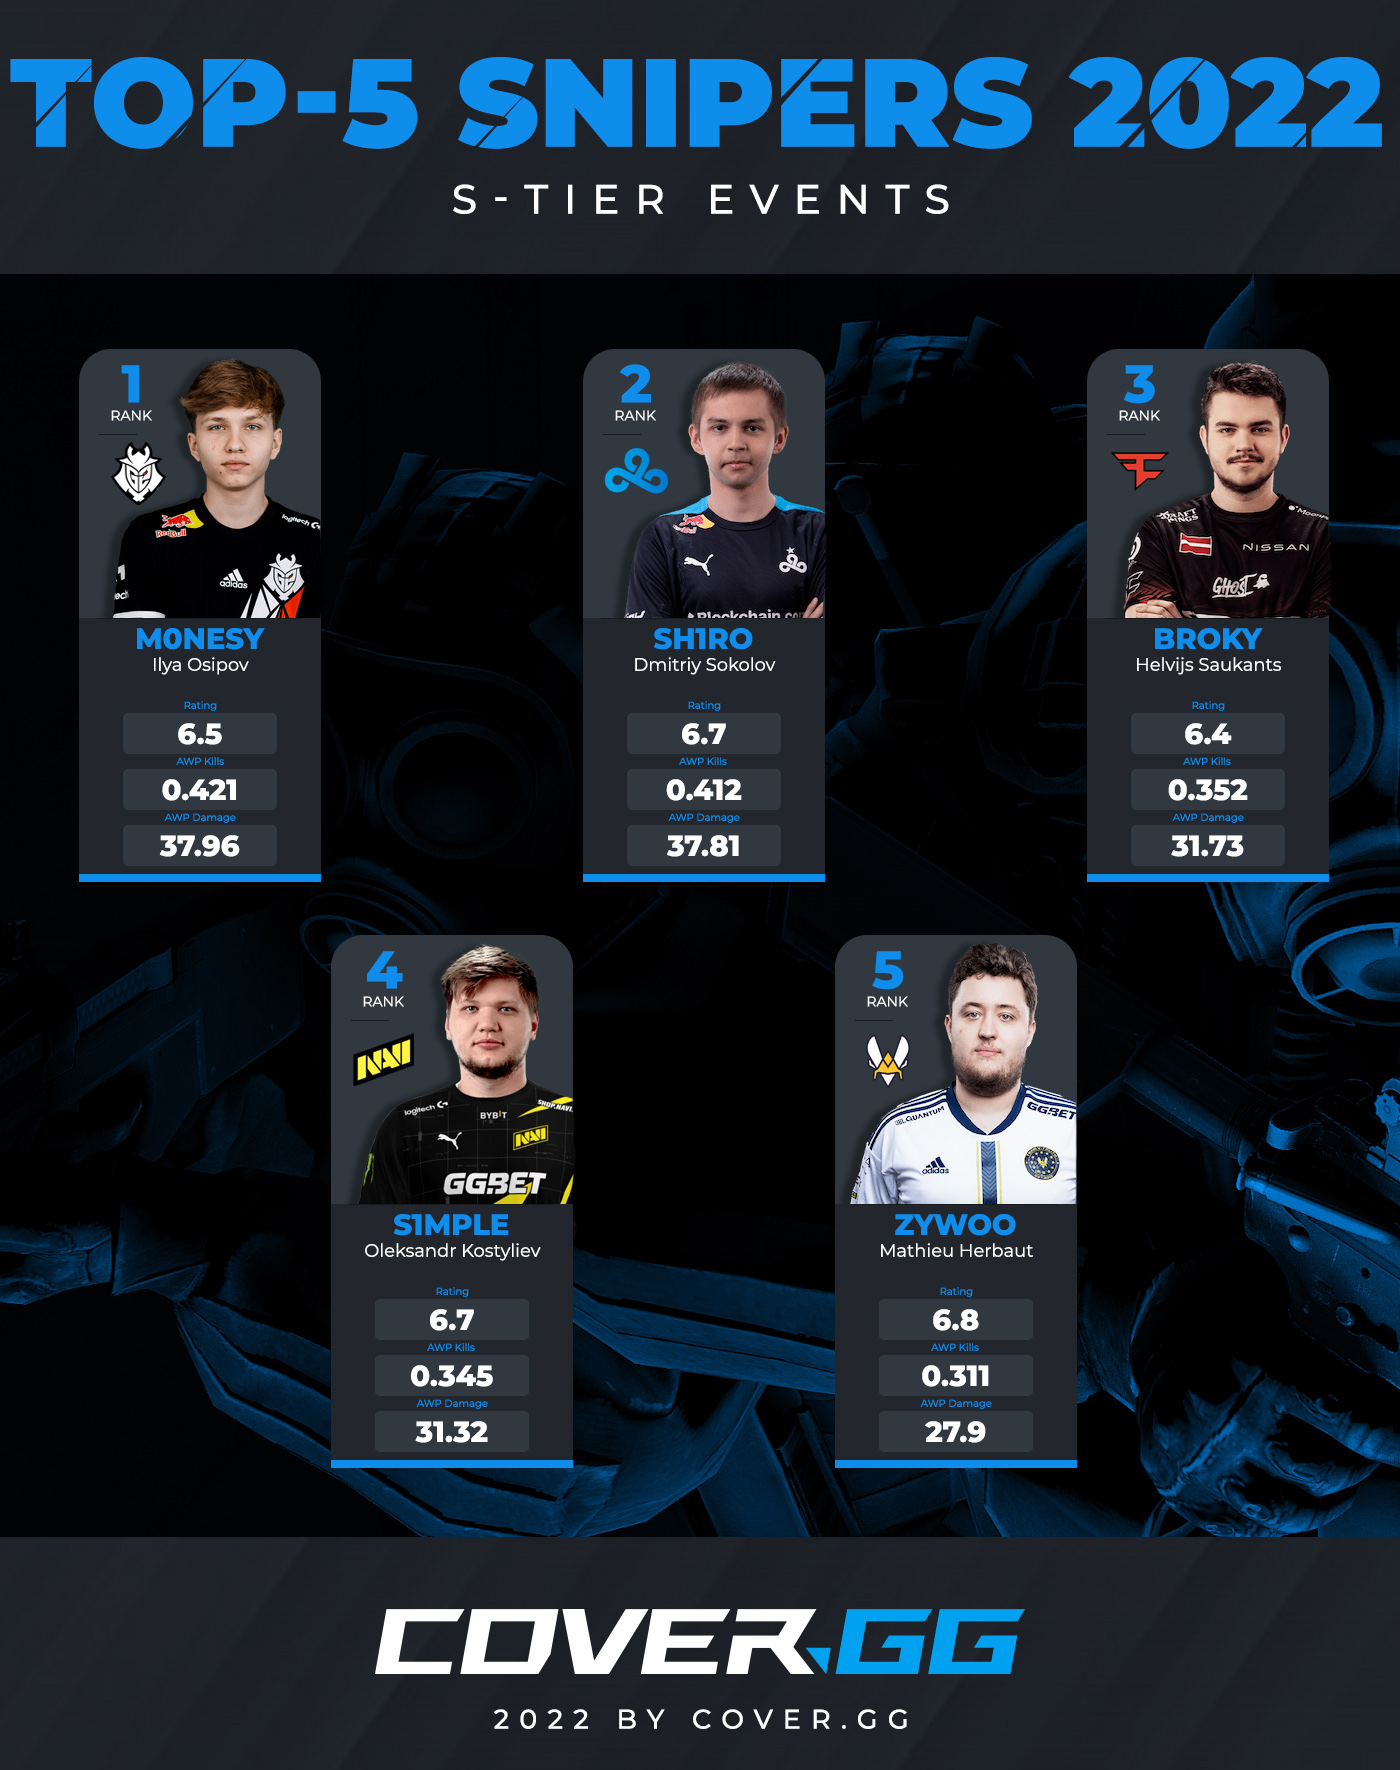 Top 5 snipers in CS:GO at the end of 2022